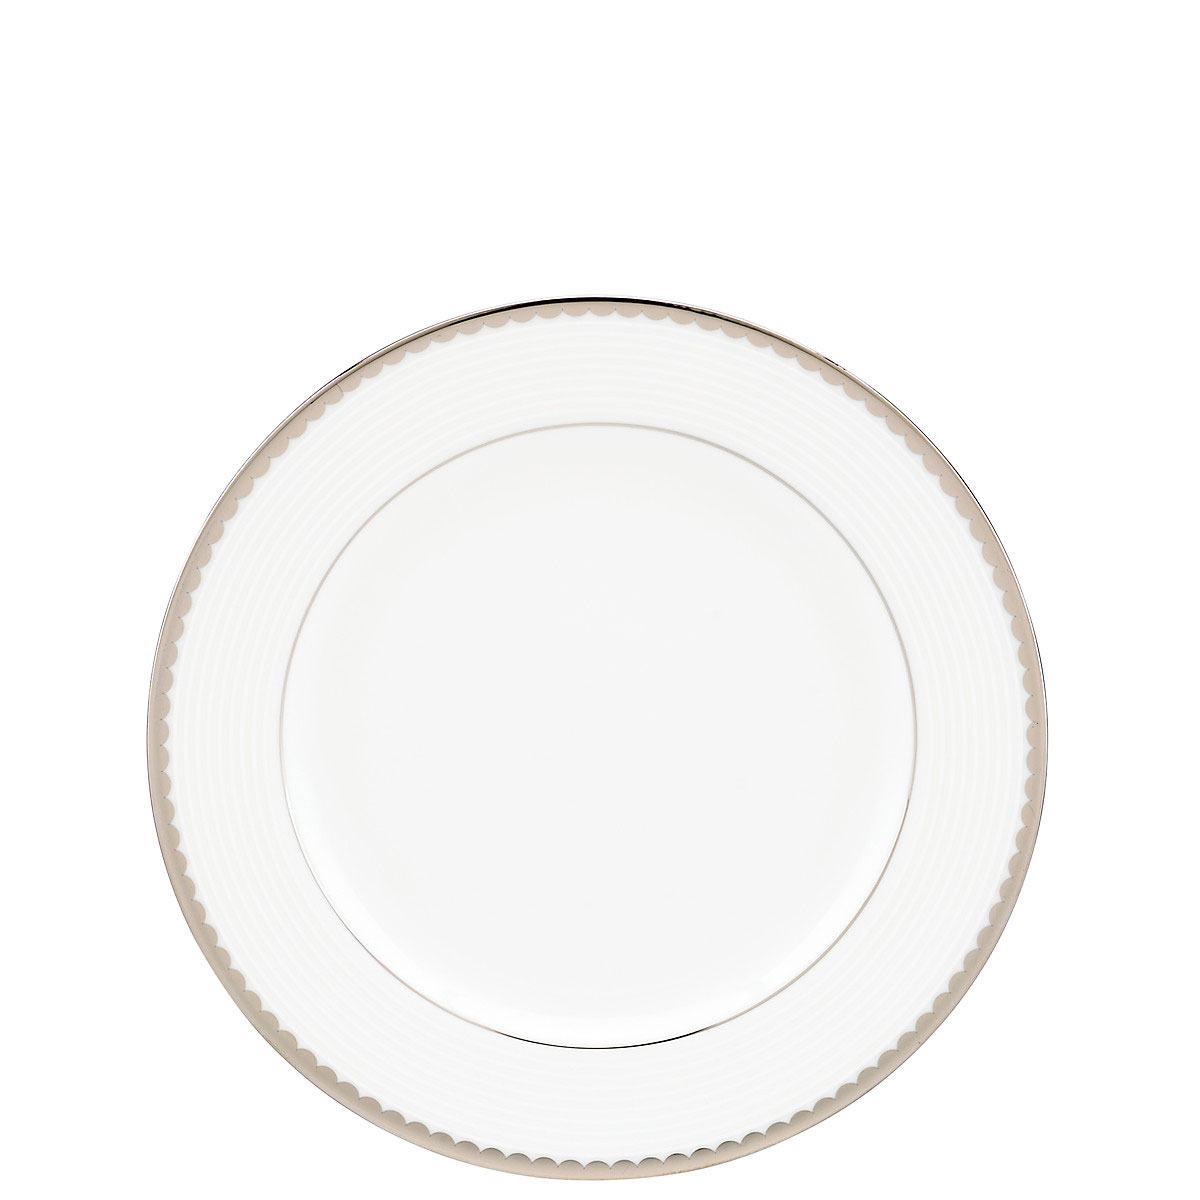 Kate Spade China by Lenox, Sugar Pointe Butter Plate